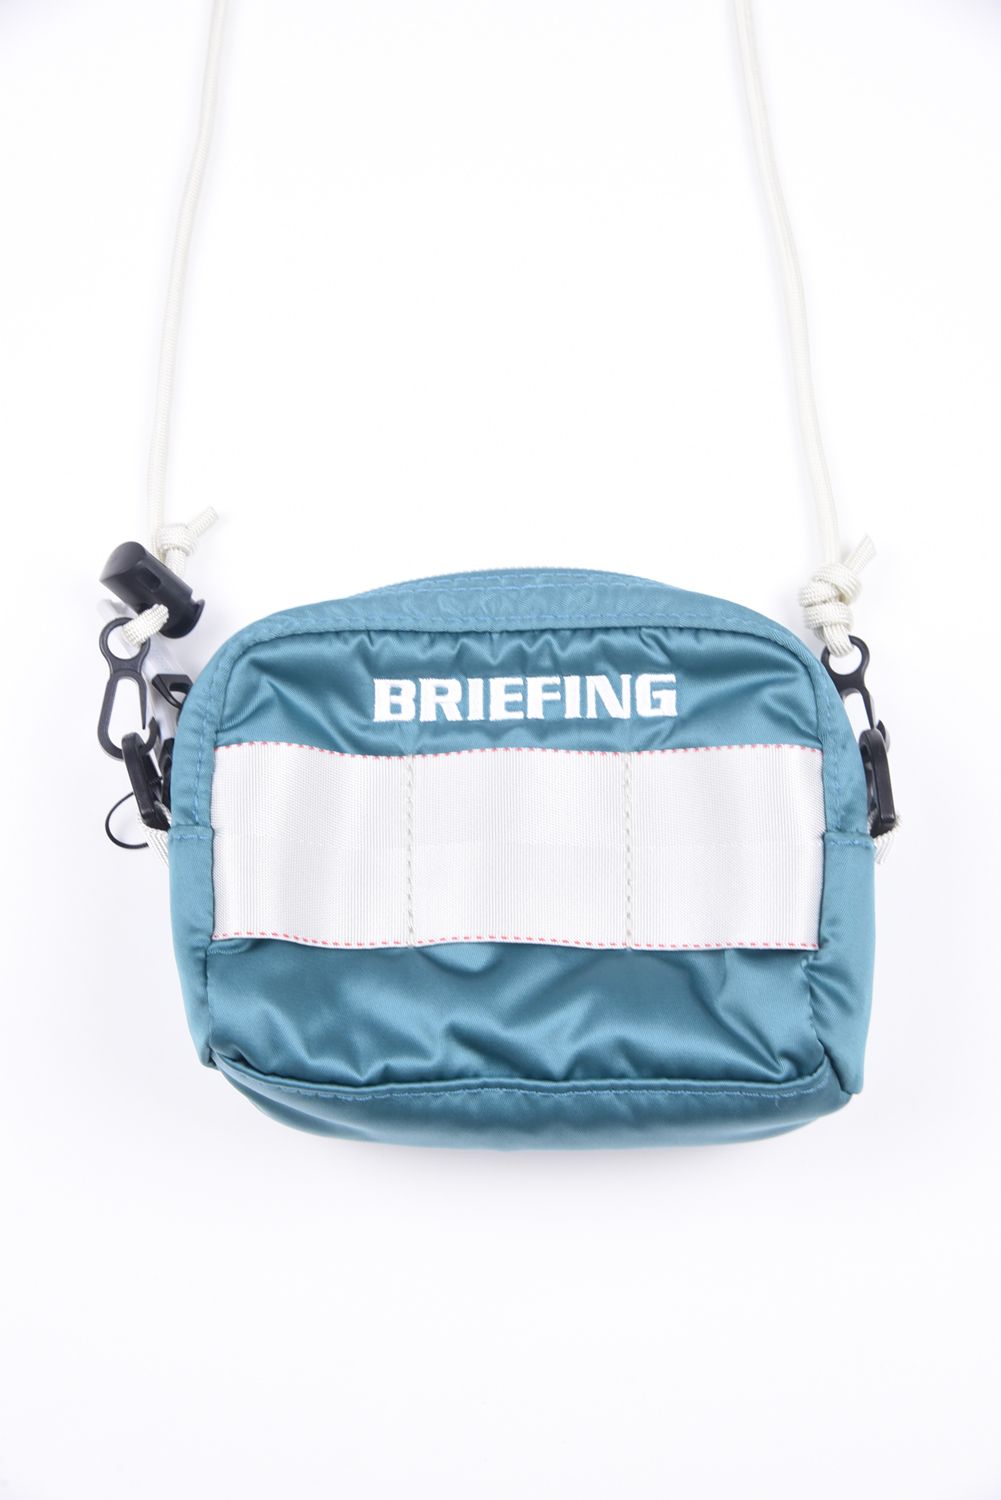 BRIEFING - 【エコツイル】 3WAY POUCH GOLF ECO TWILL / 3WAYポーチ